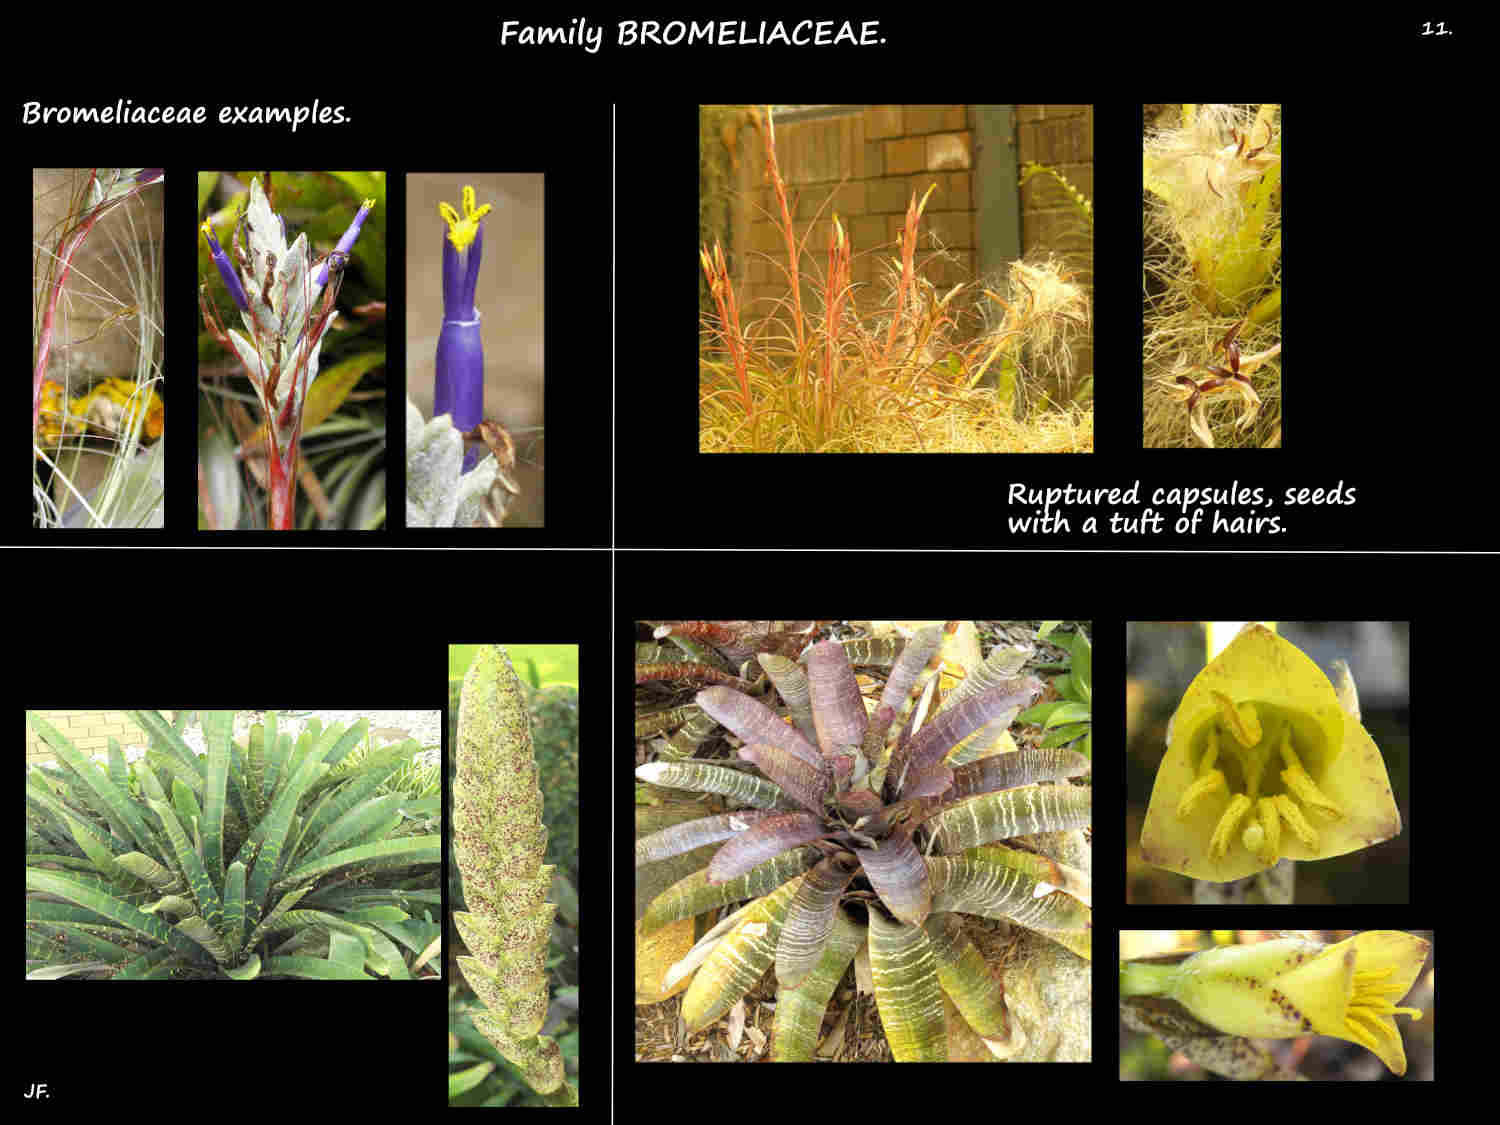 11 Some Bromeliaceae examples